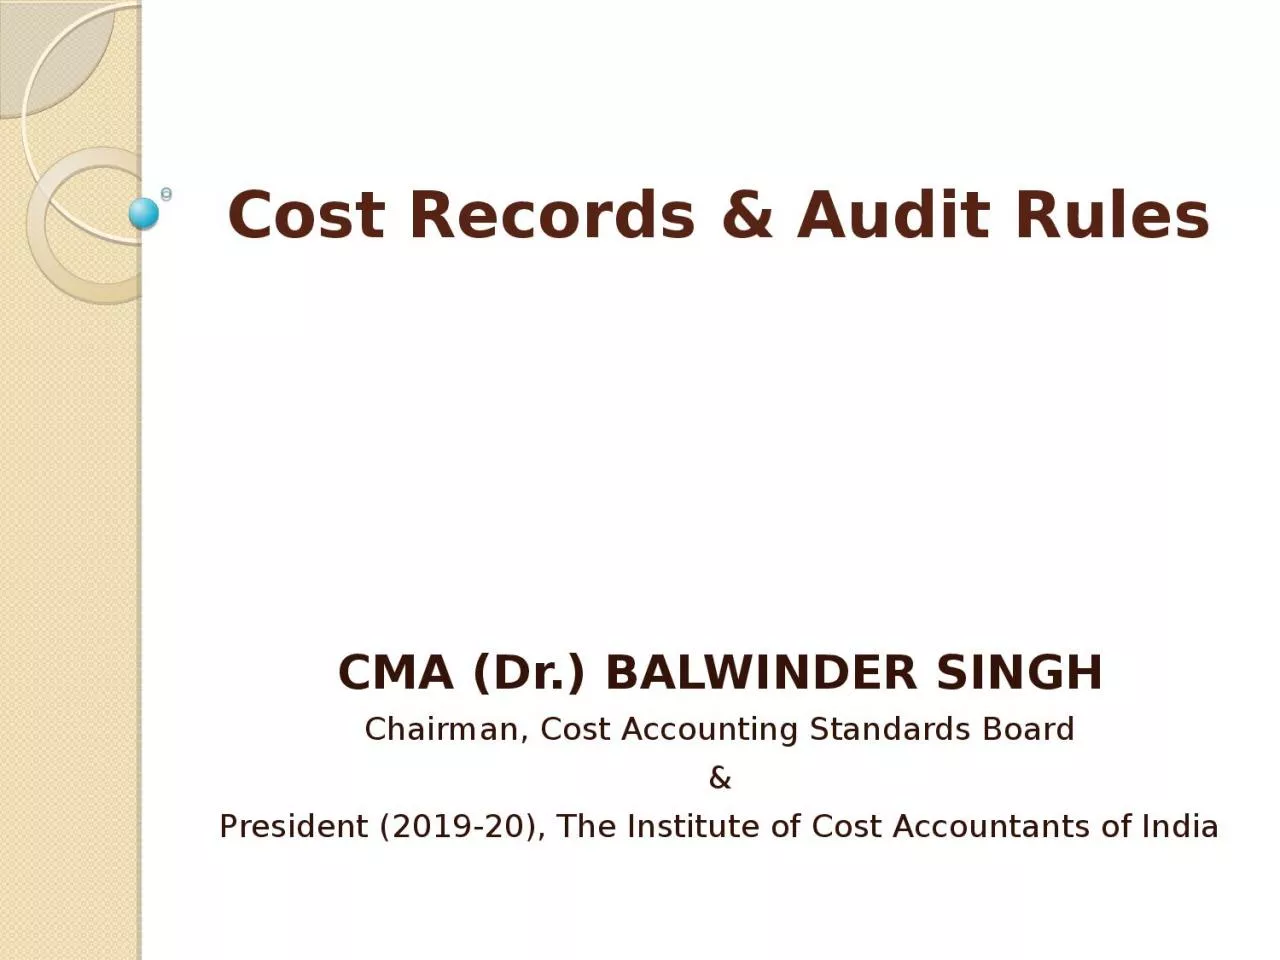 Cost Records & Audit Rules